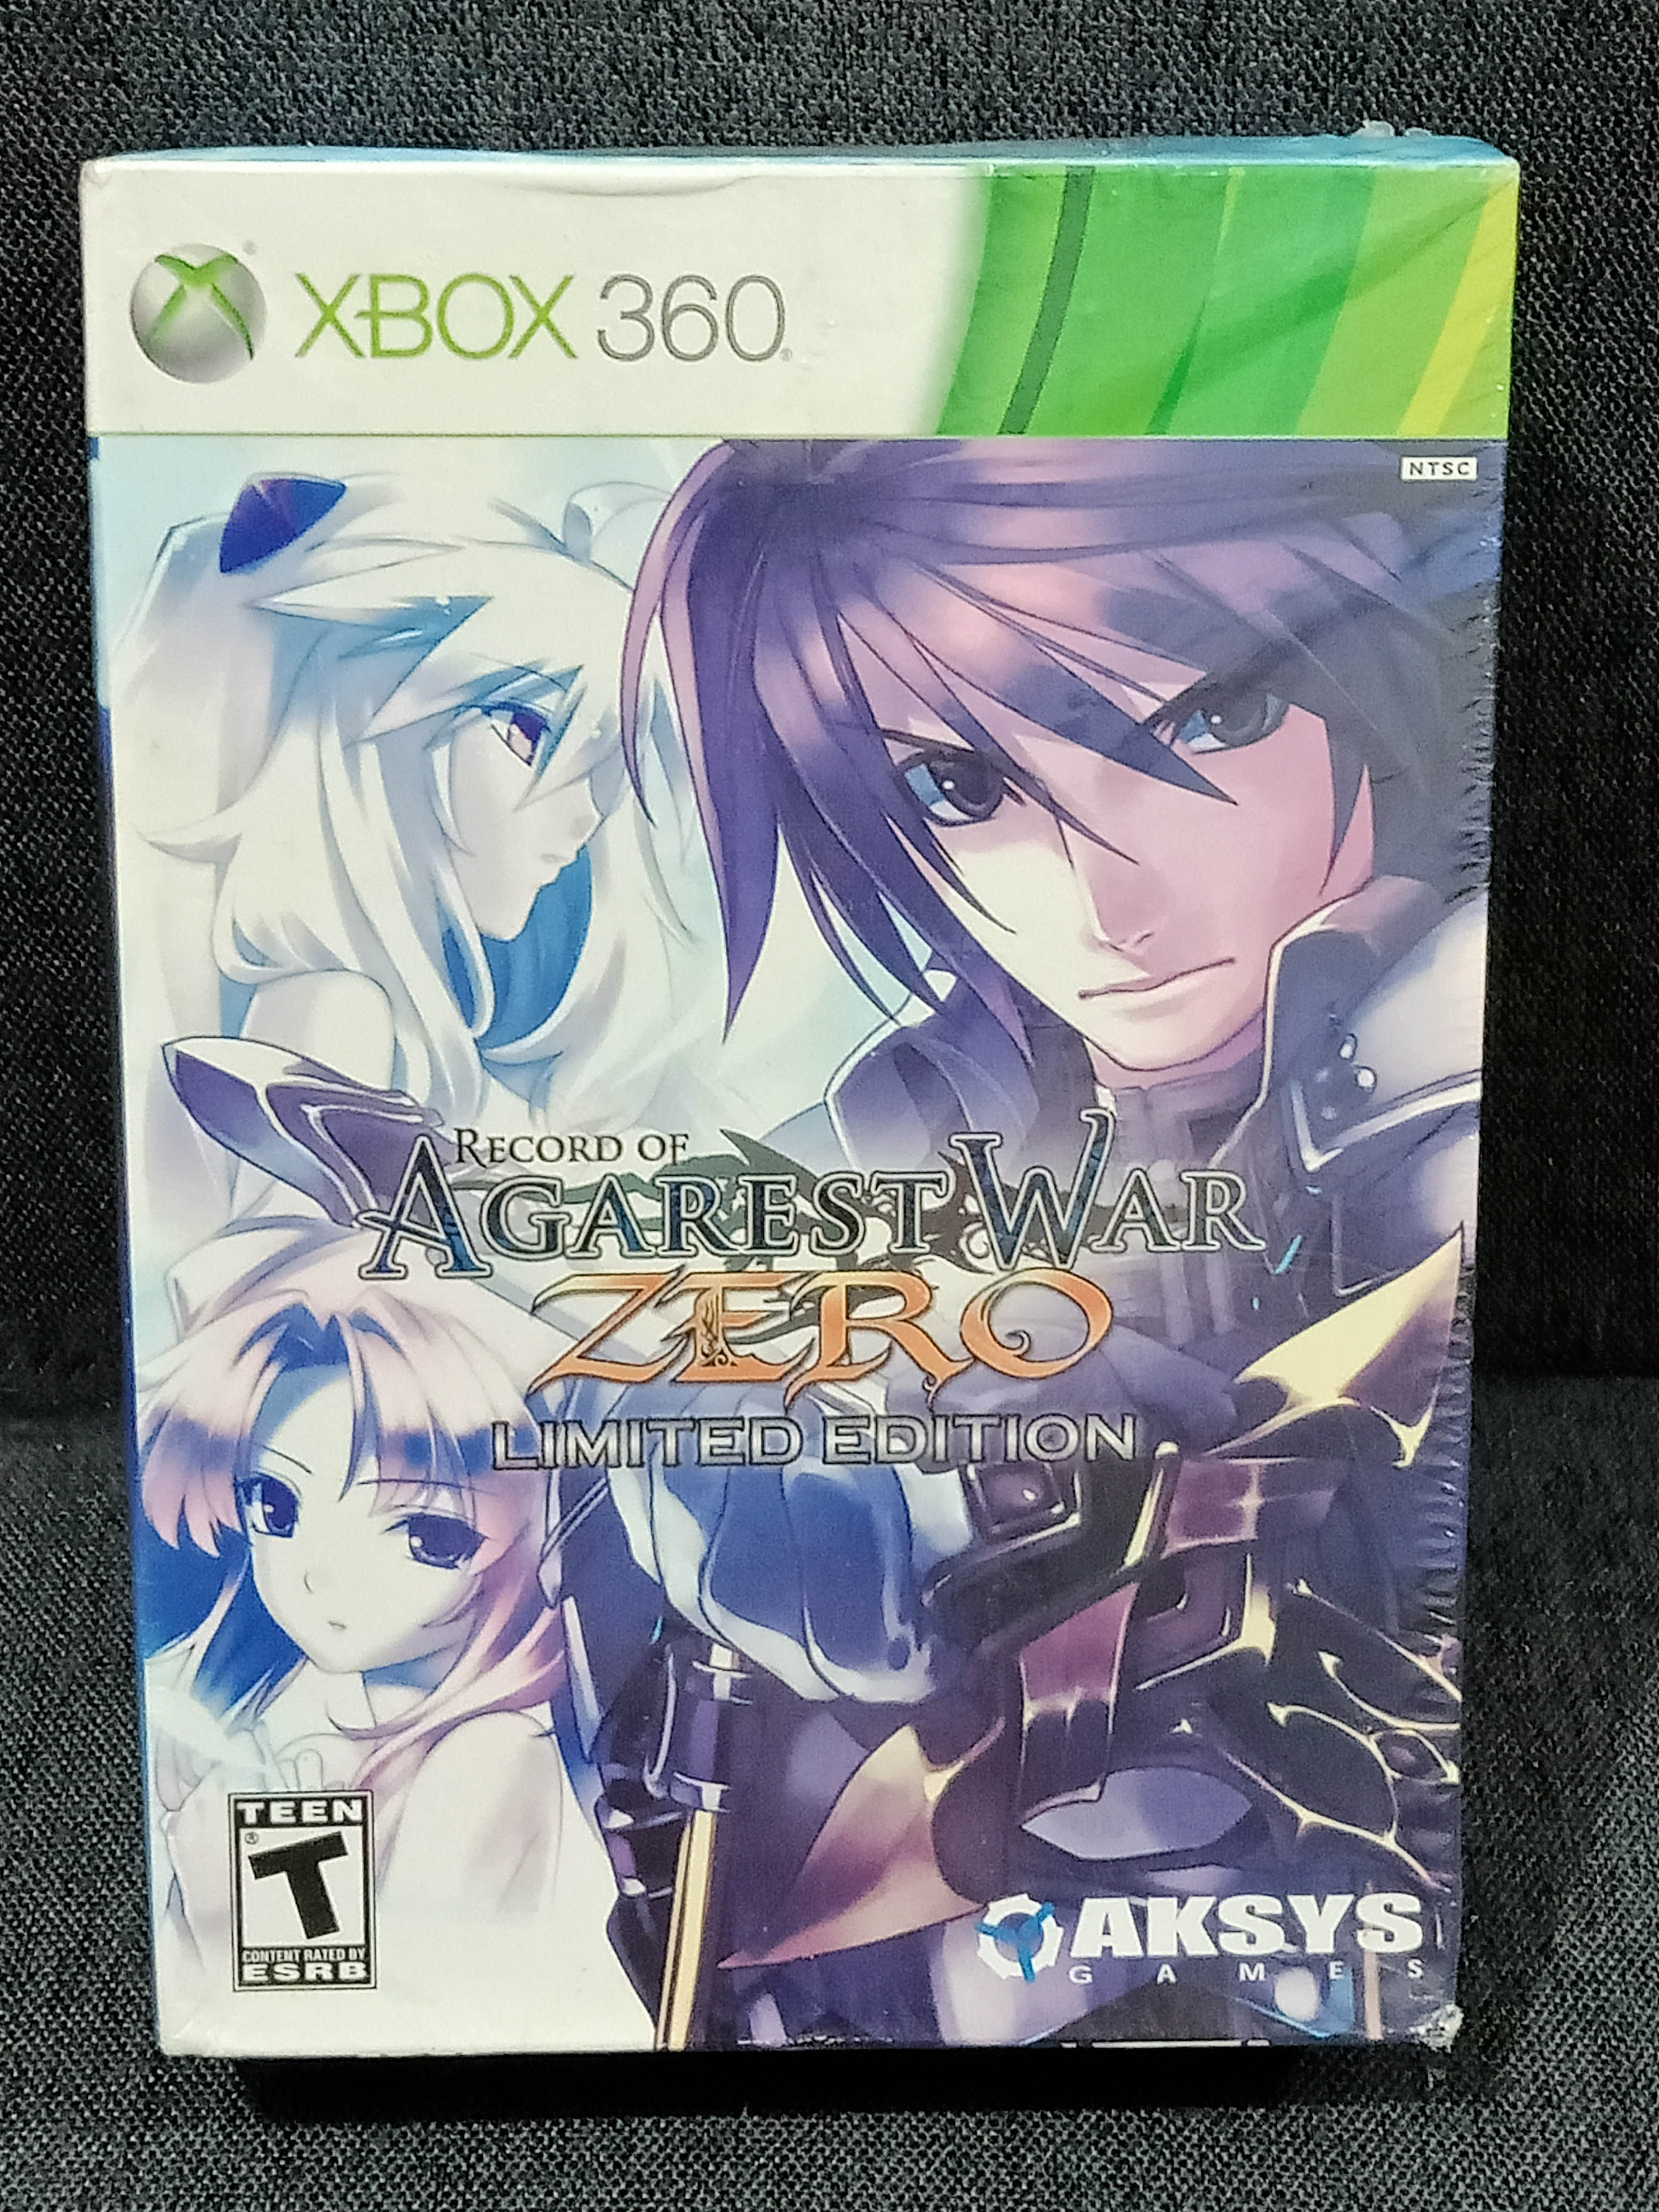 Record of Agarest War - Xbox 360